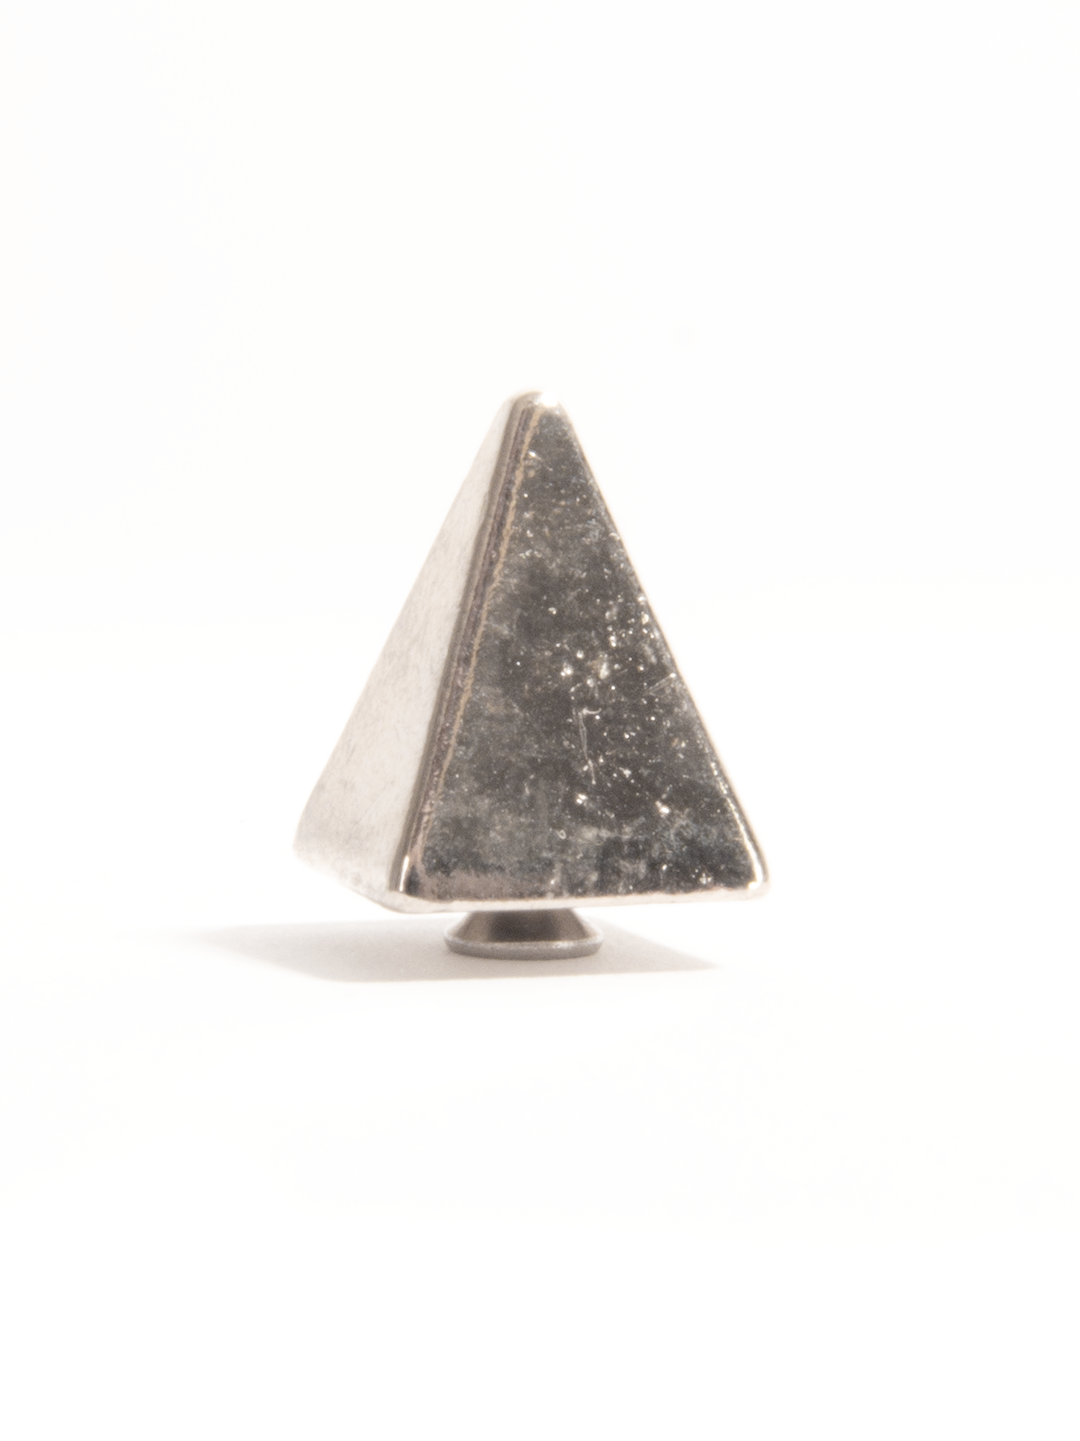 0.625" Pyramid Spikes - Pack of 10